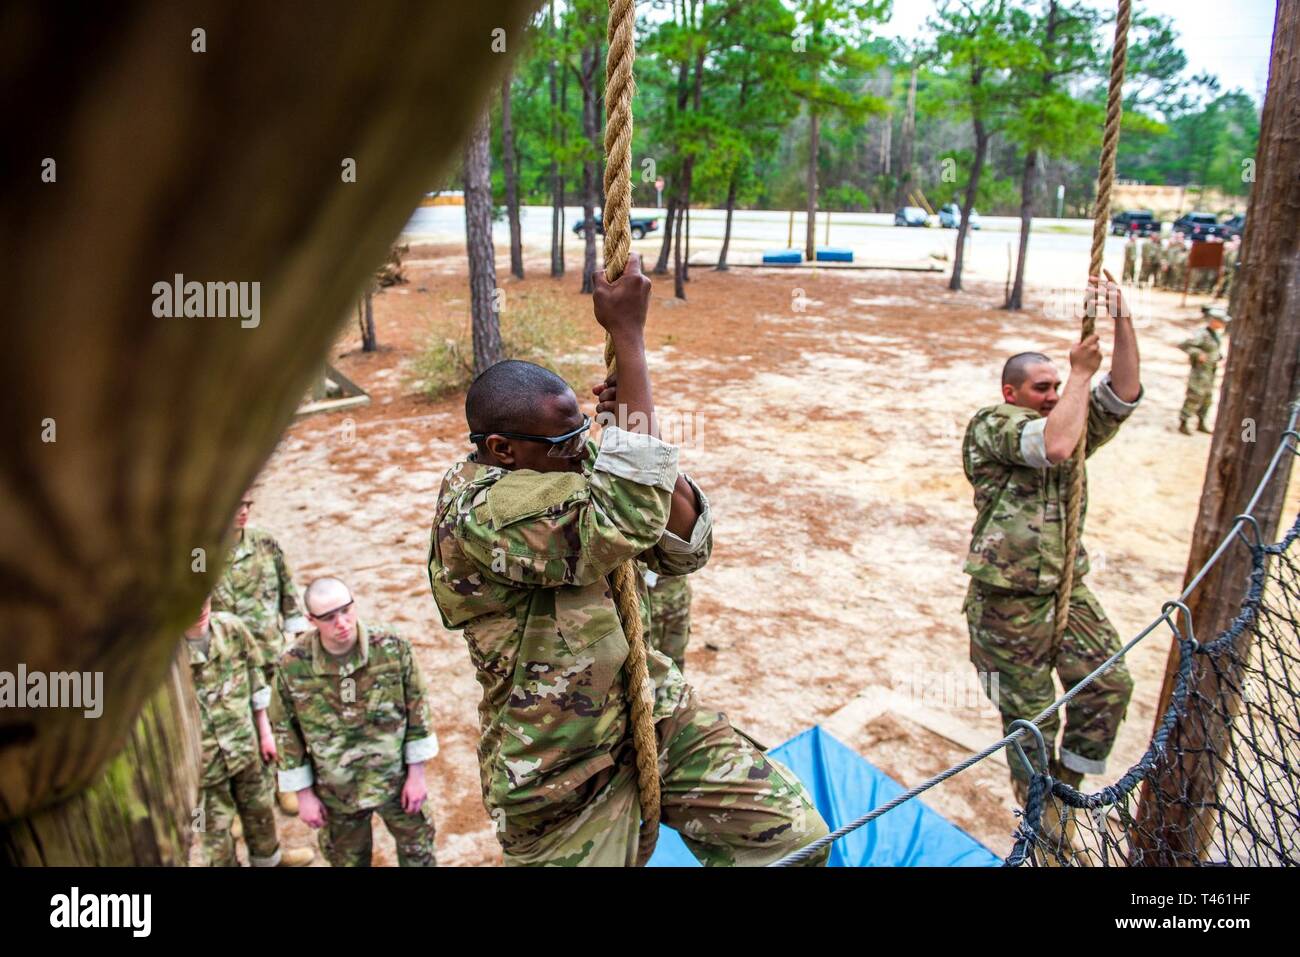 https://c8.alamy.com/comp/T461HF/fort-benning-ga-trainees-from-foxtrot-company-2nd-battalion-19th-infantry-regiment-negotiate-a-confidence-course-on-sand-hill-feb-27-2019-at-fort-benning-the-mission-of-the-219th-infantry-battalion-is-to-transform-civilians-into-disciplined-infantrymen-T461HF.jpg